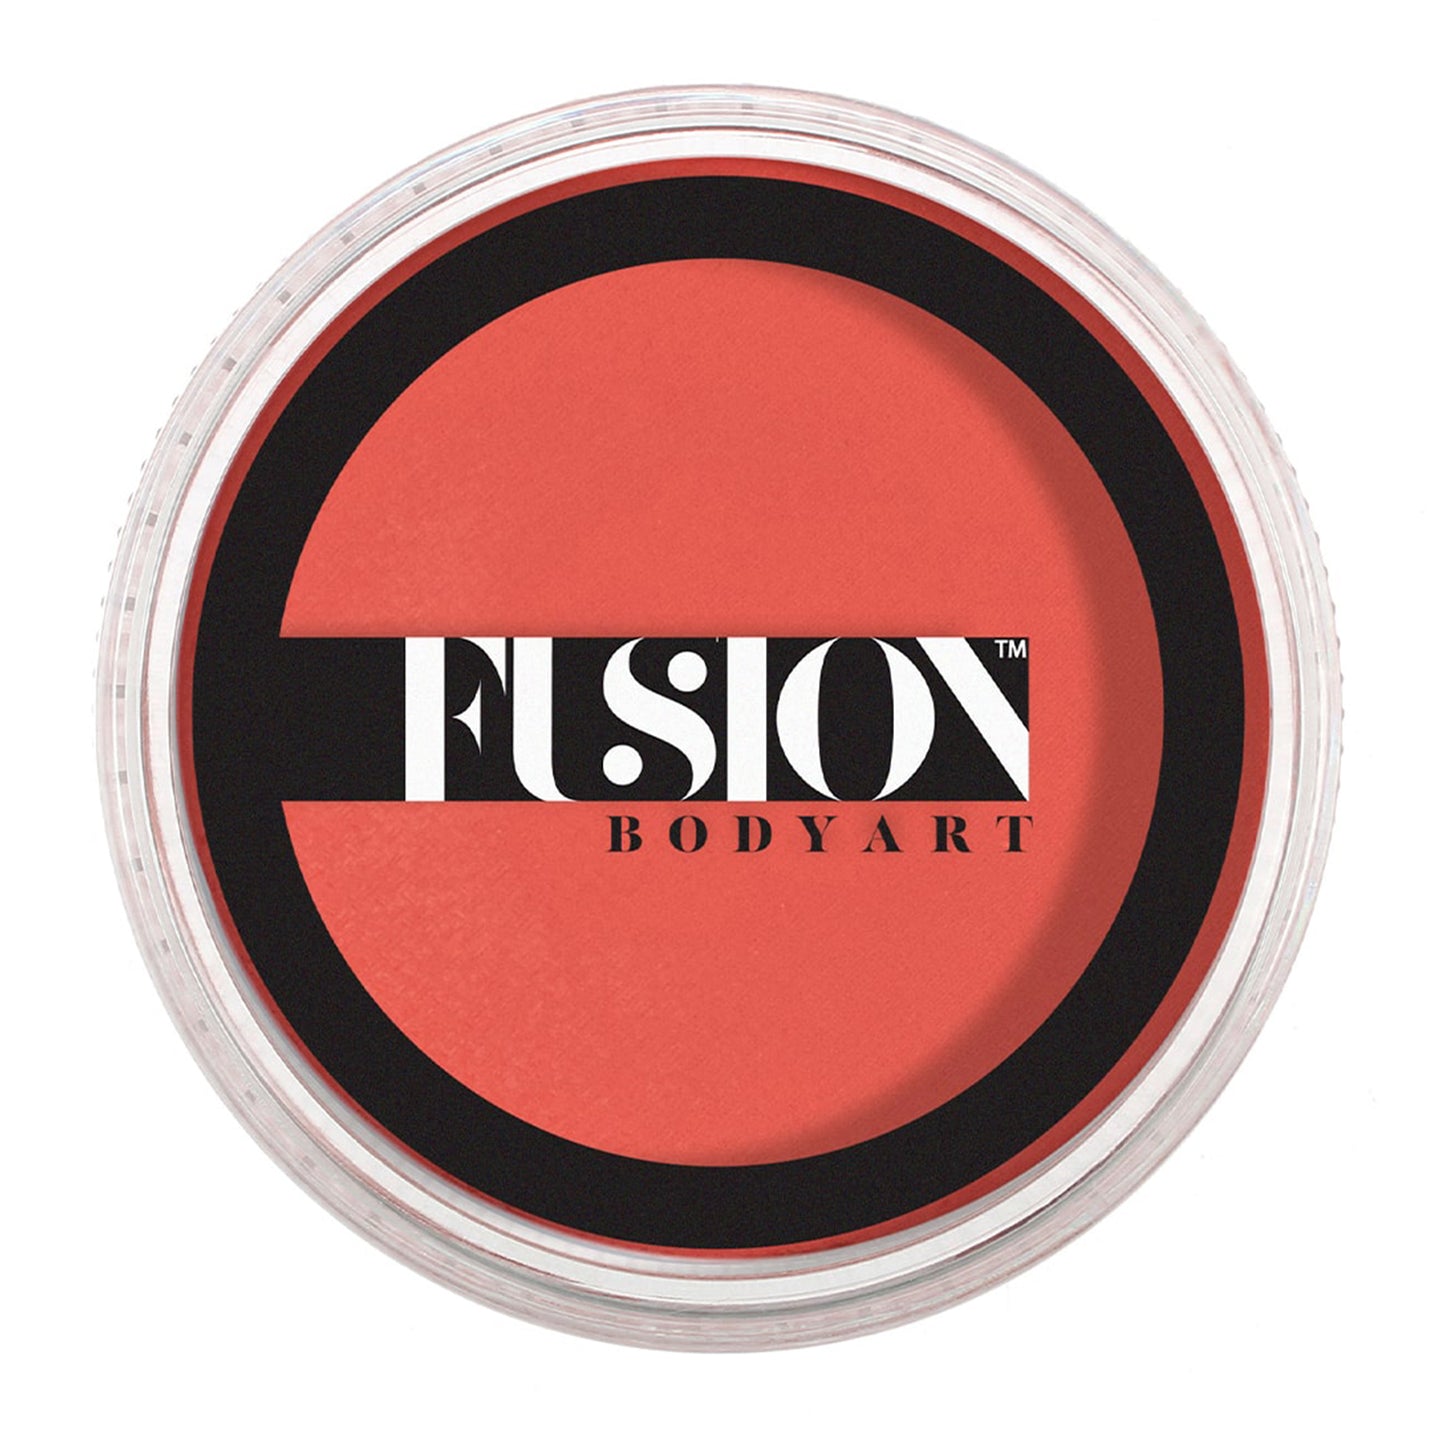 Fusion Body Art Face & Body Paint - Prime Coral (32 gm)